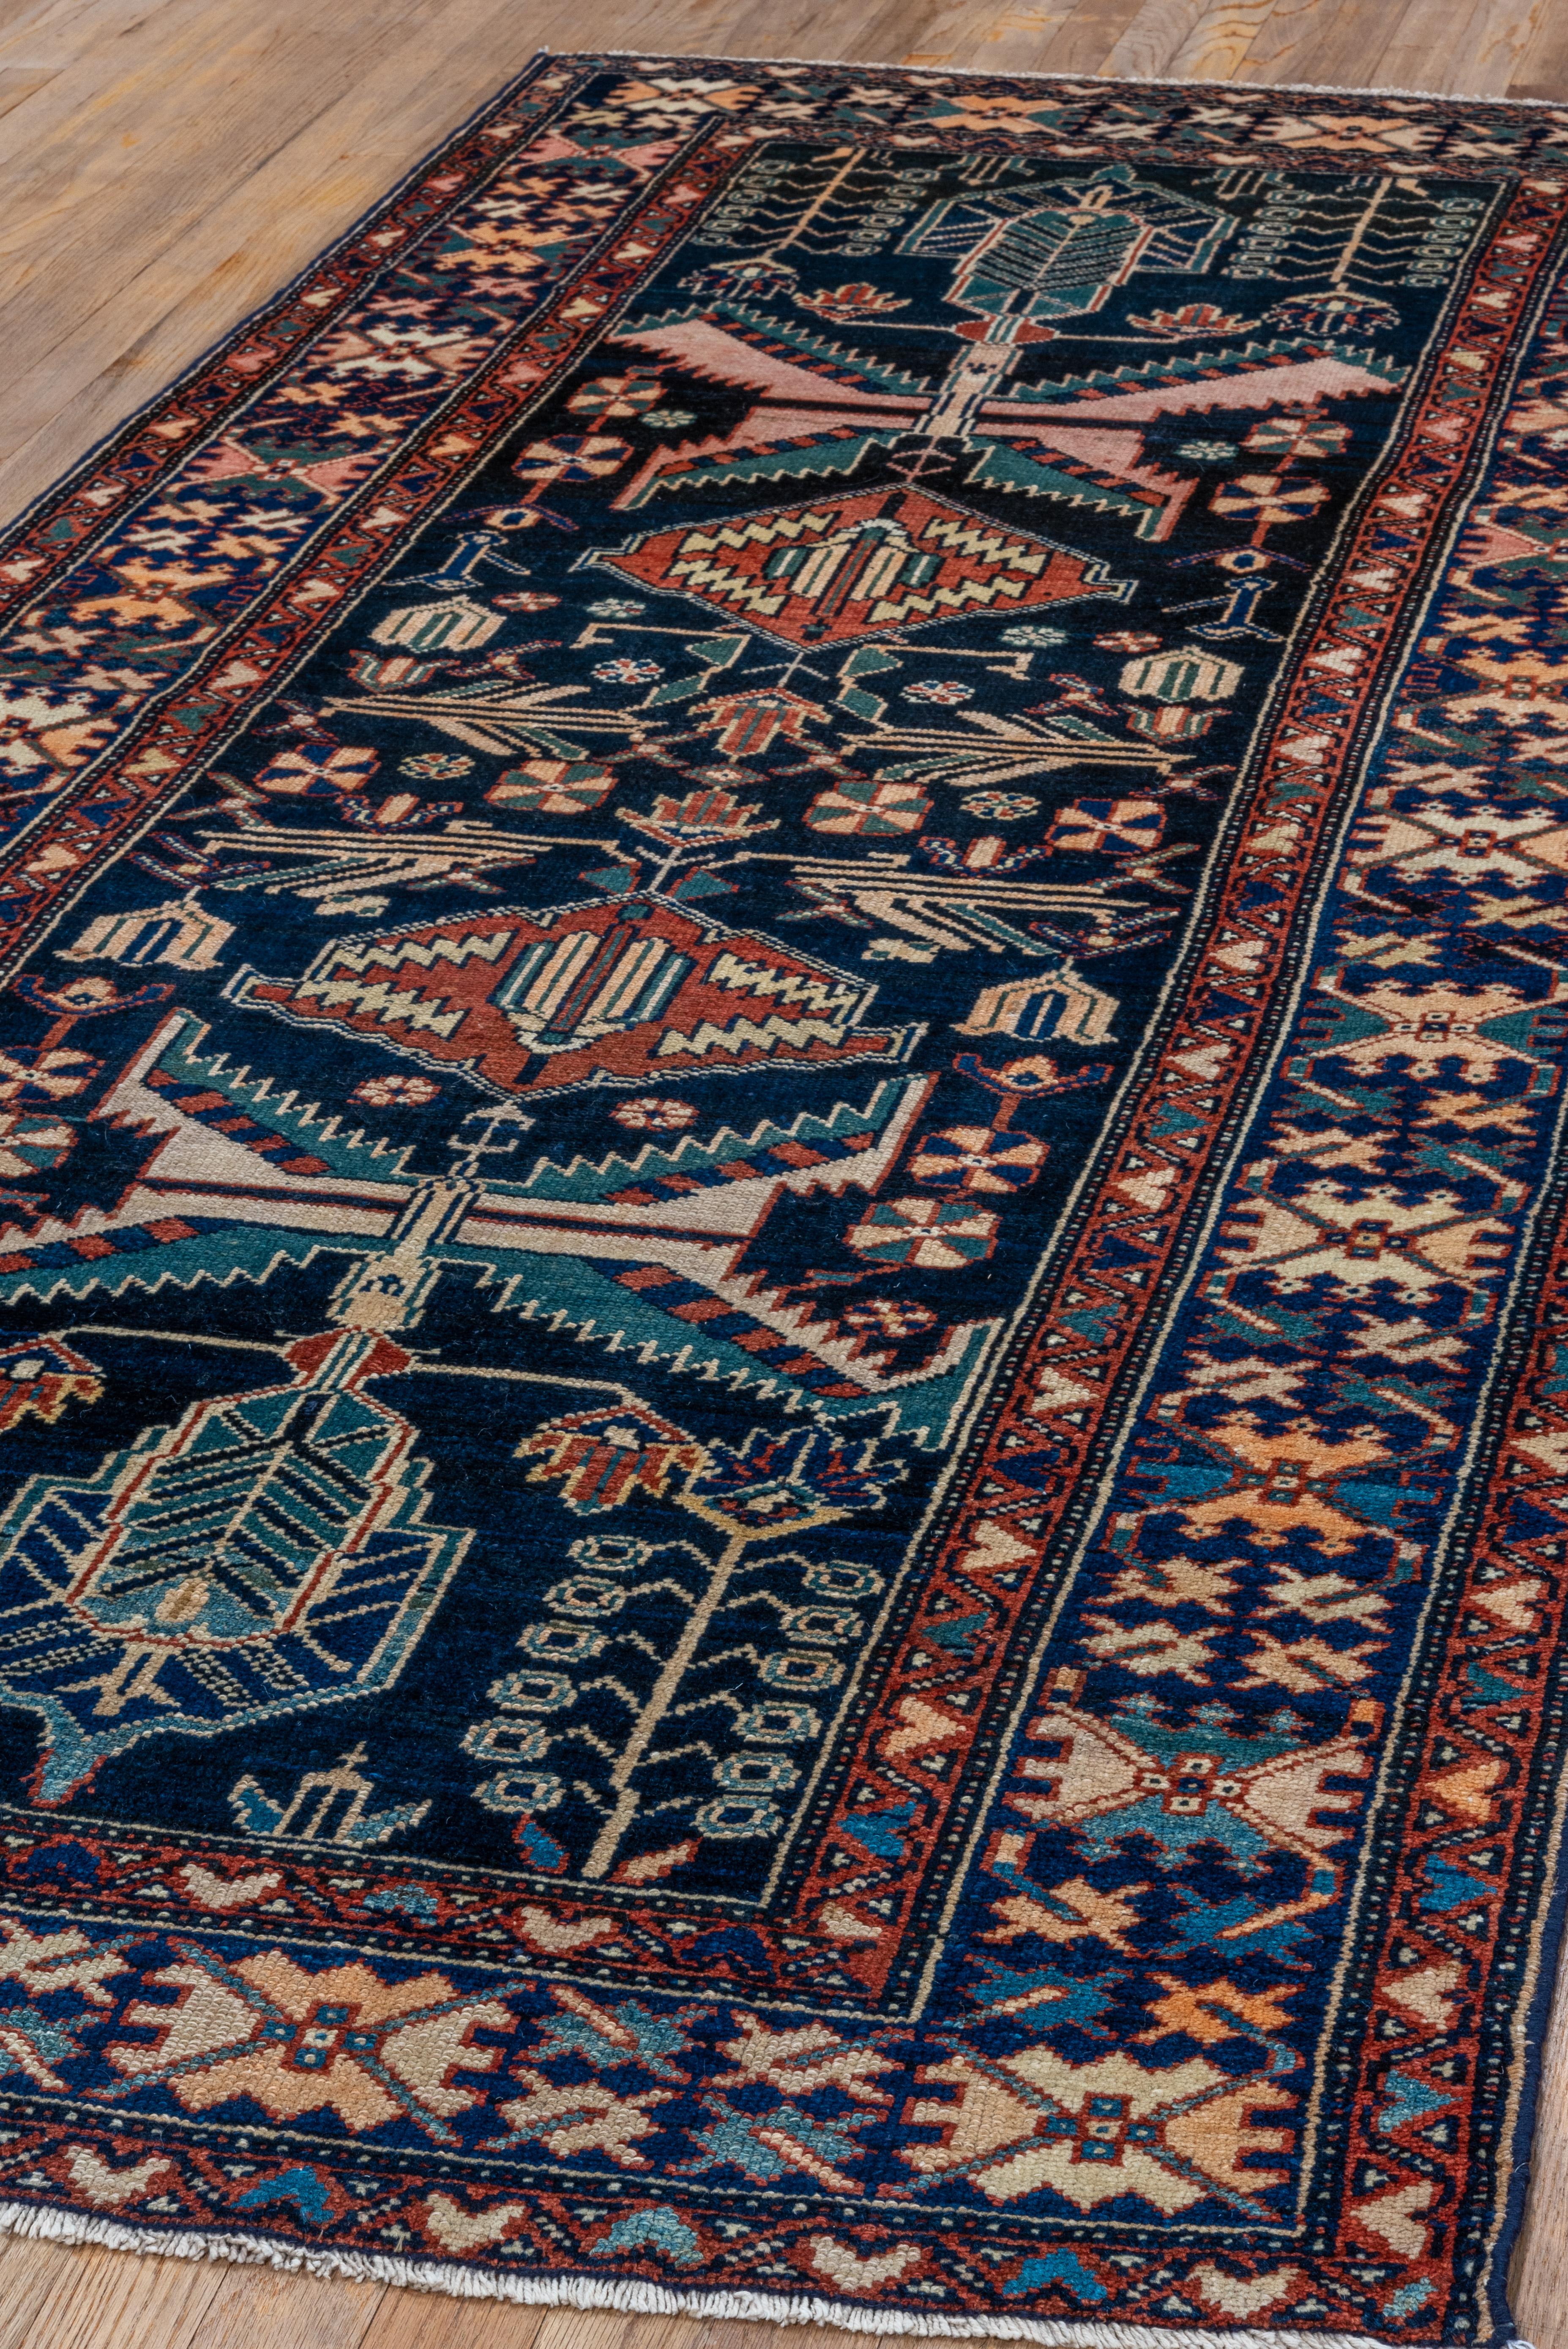 Wool Antique Persian Malayer Rug, Blue Field, Teal Accents For Sale